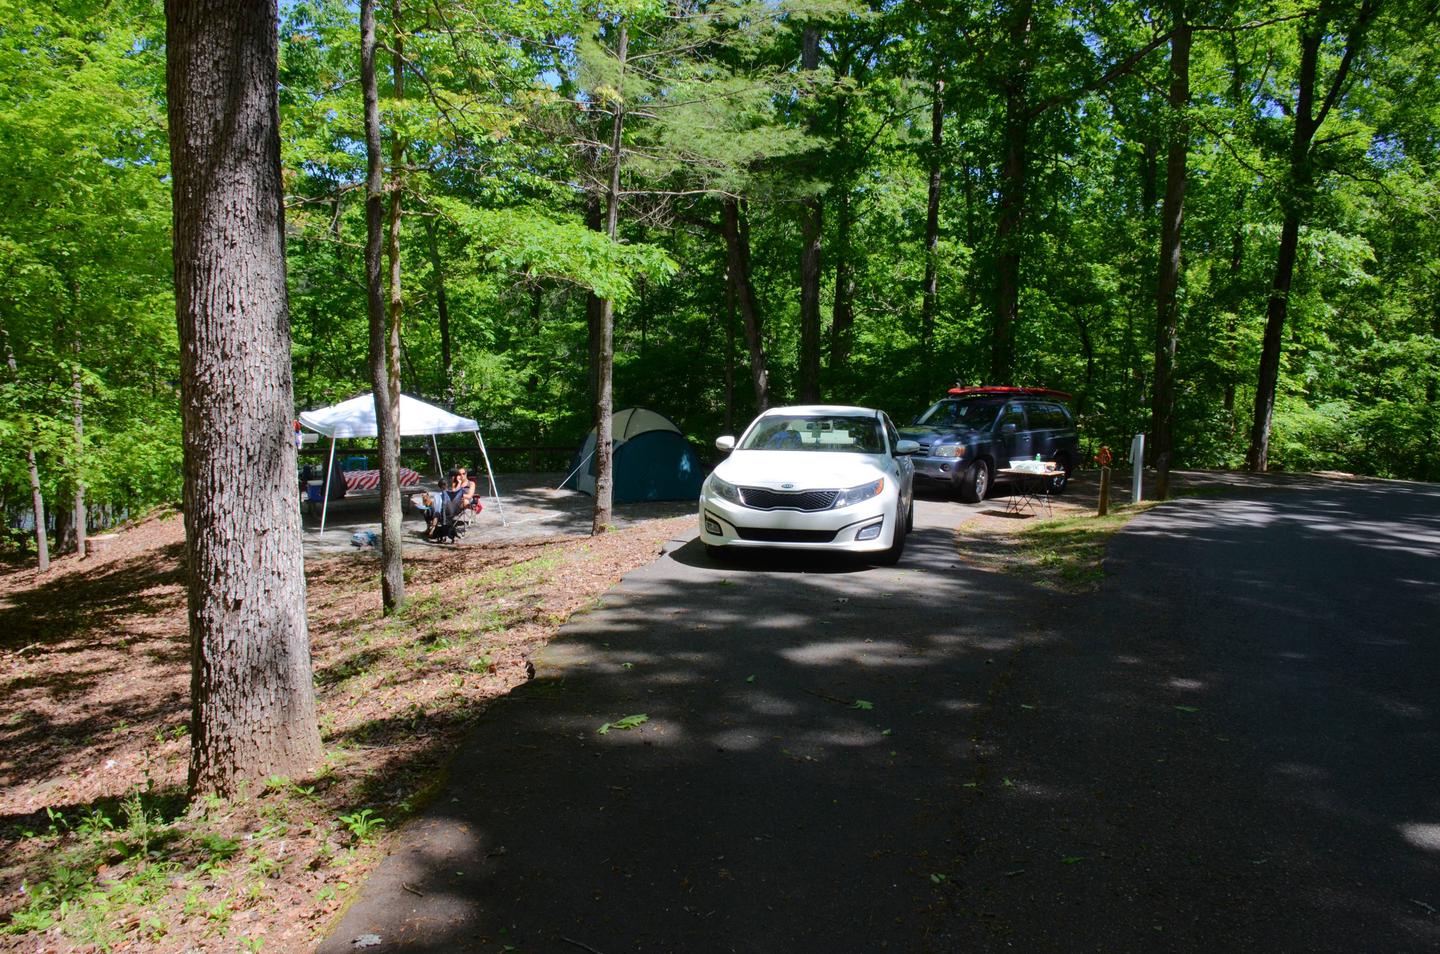 Pull-thru exit, driveway slope, awning-side clearance.McKinney Campground, campsite 83.